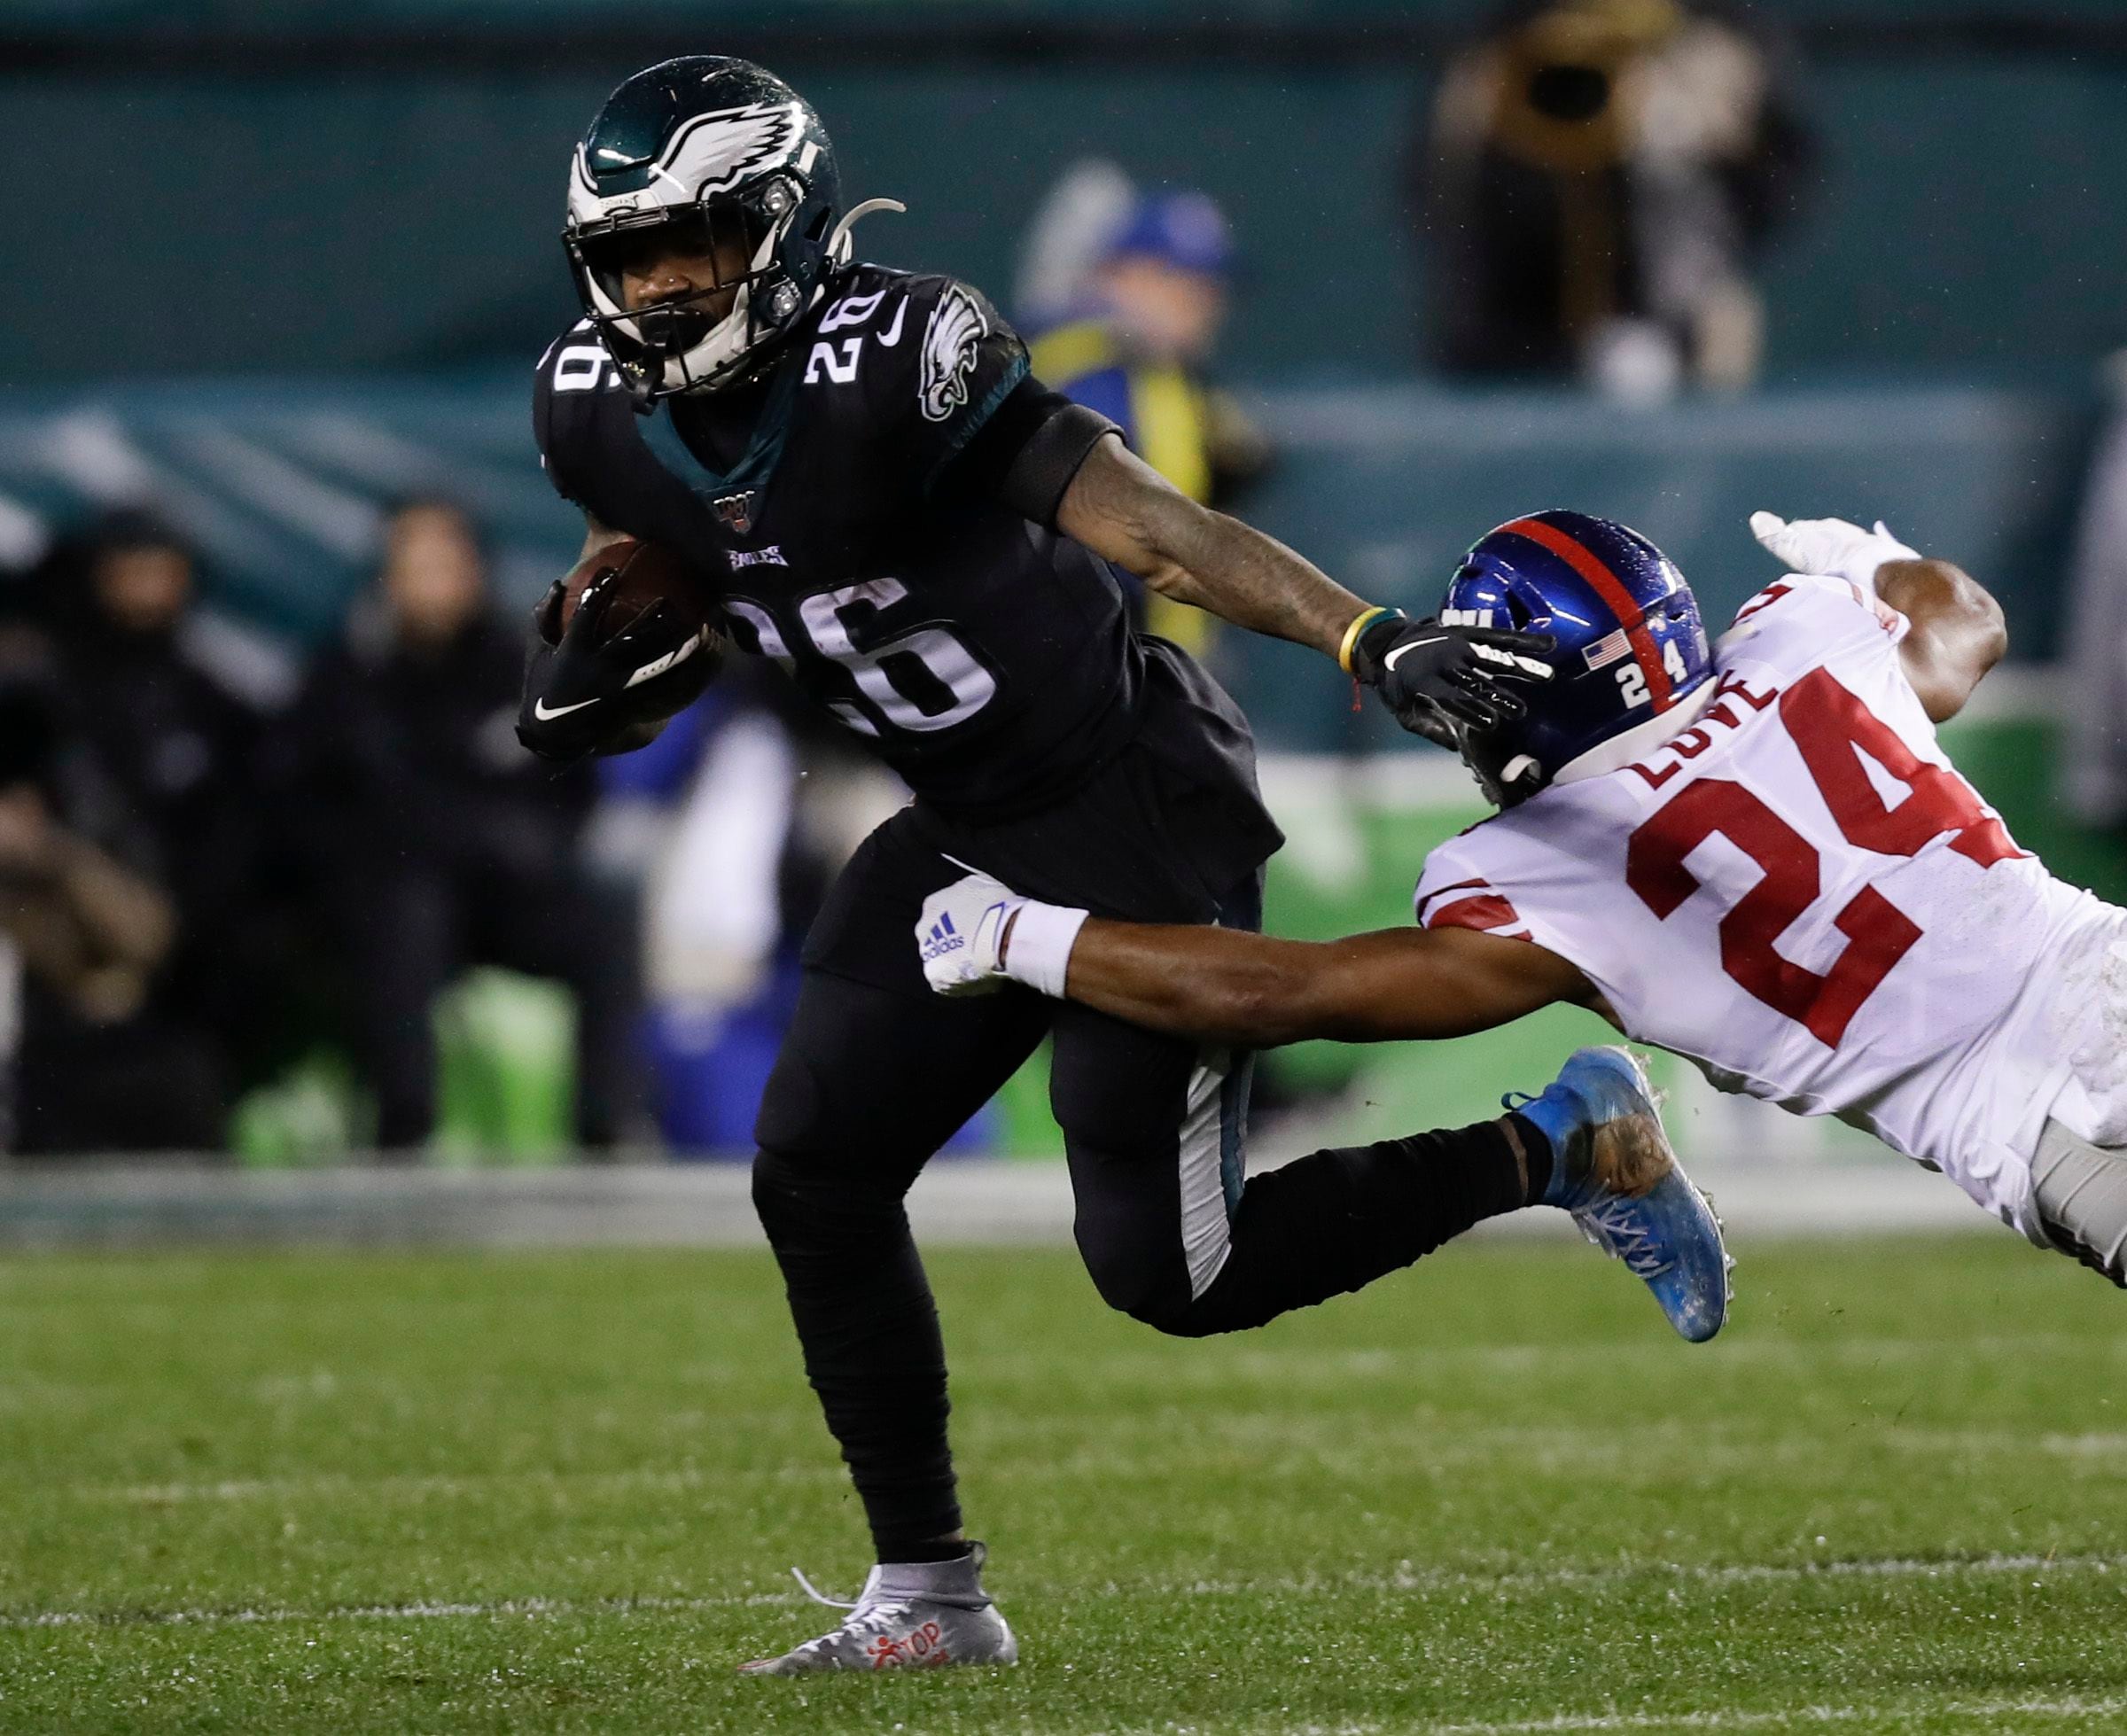 Giants writer gives 3 reasons why the Eagles will win the